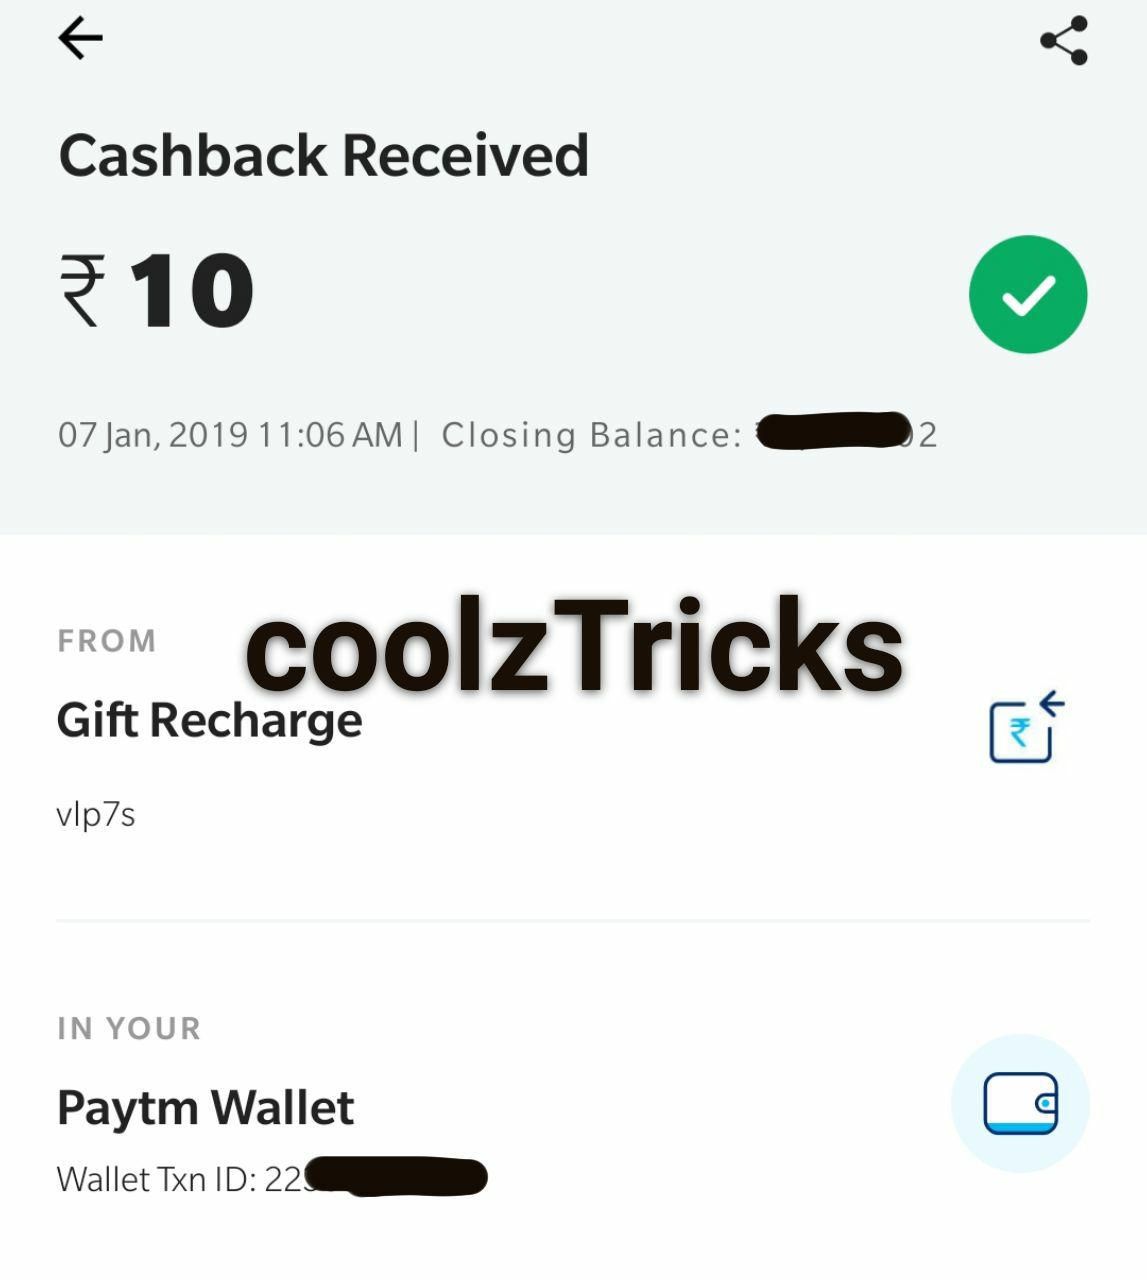 (Loot Lo) Misscall & Get Free Rs.10 PayTM Cash In All Numbers